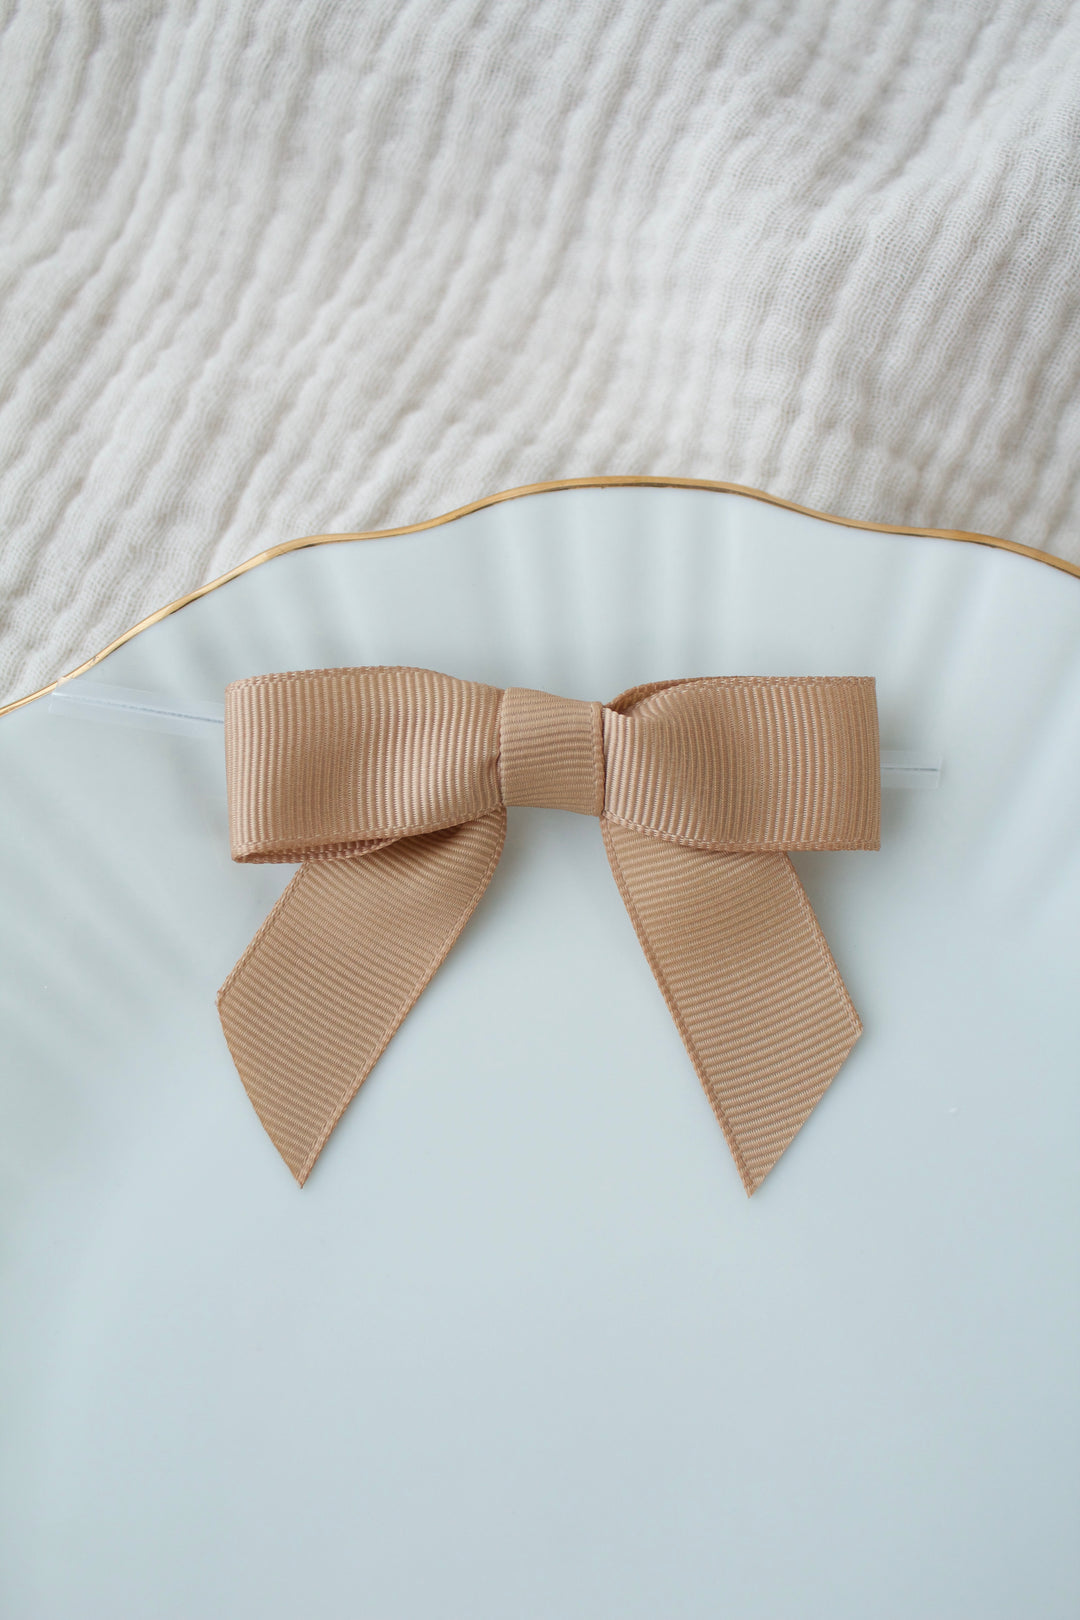 Taupe - Grosgrains pre-tied bows (20pcs) with clear twist tie